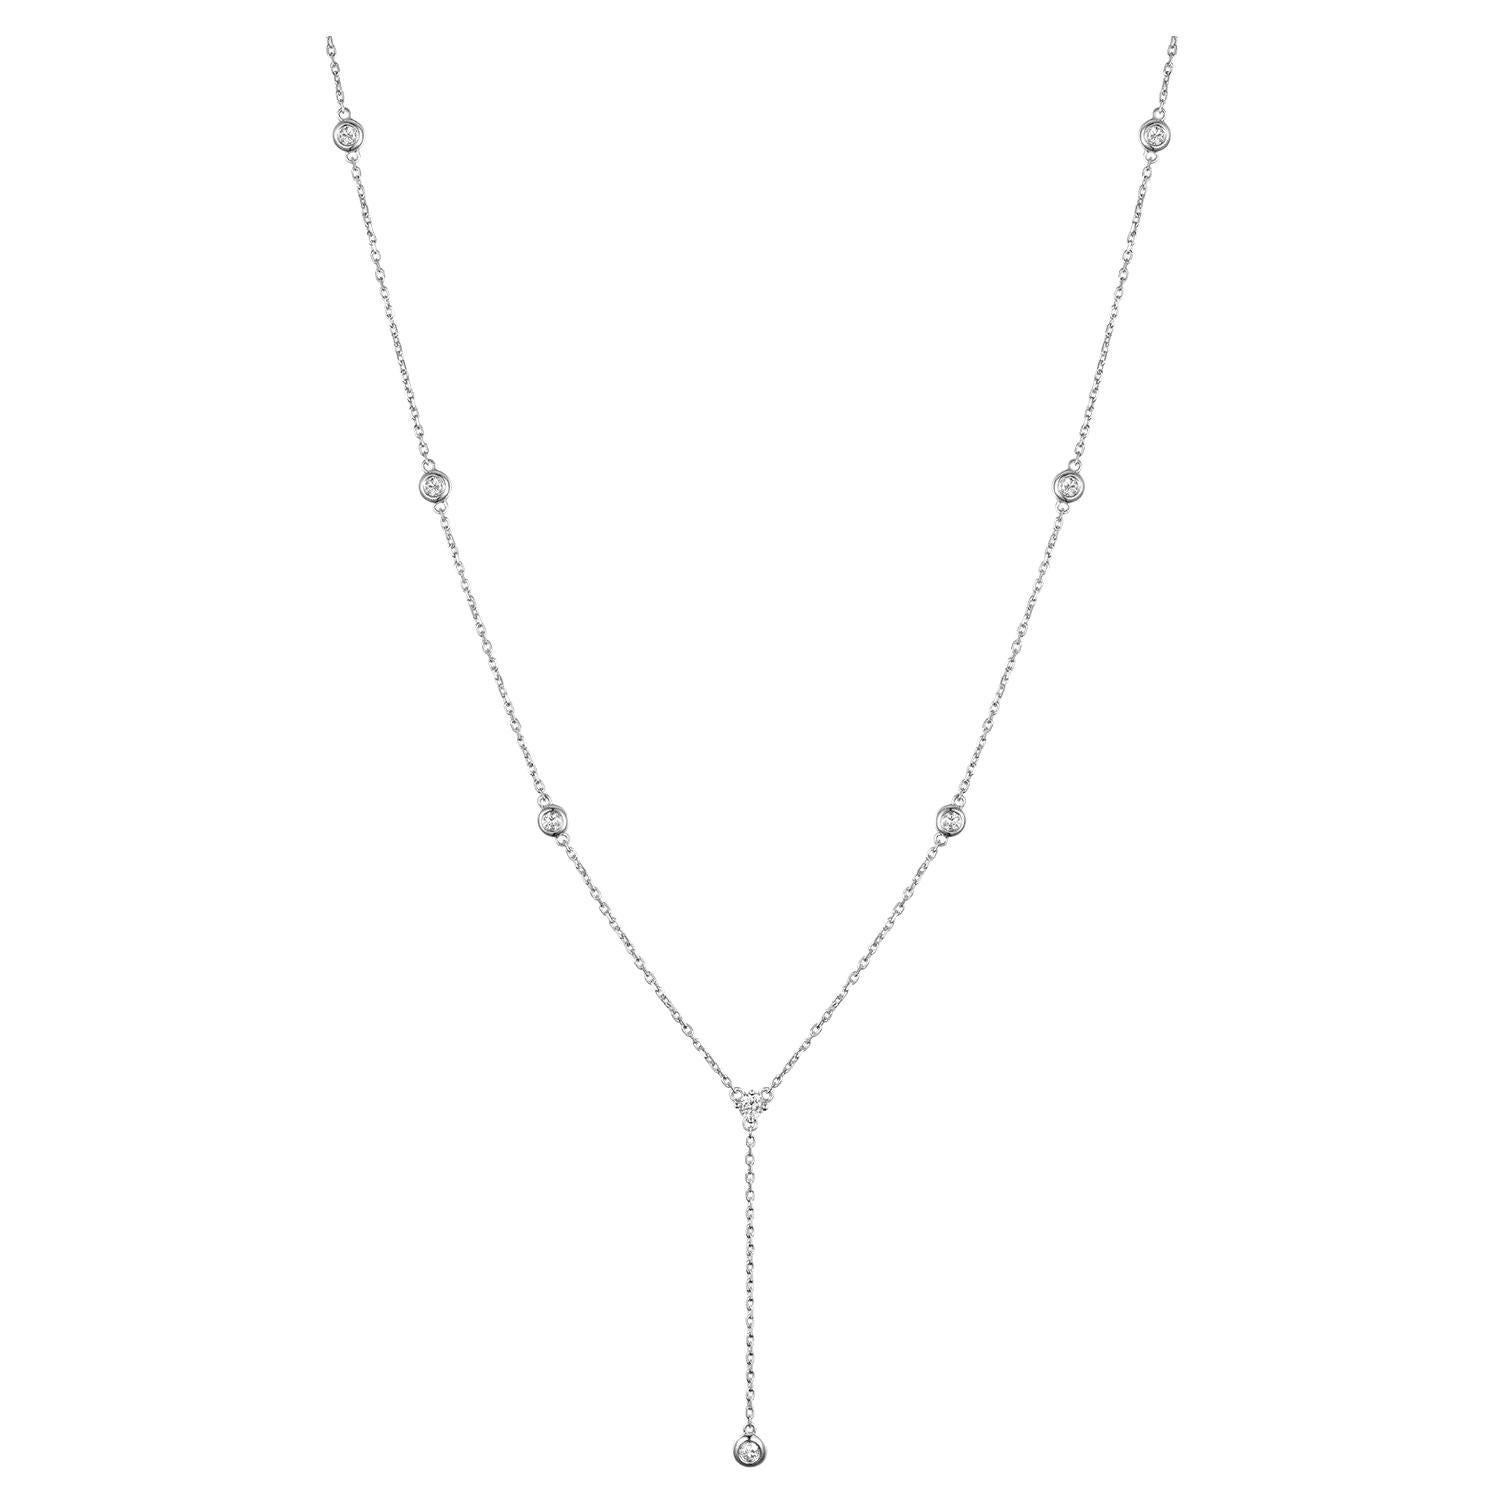 8-Station Diamond by the Yard Necklace in 14 Karat White Gold